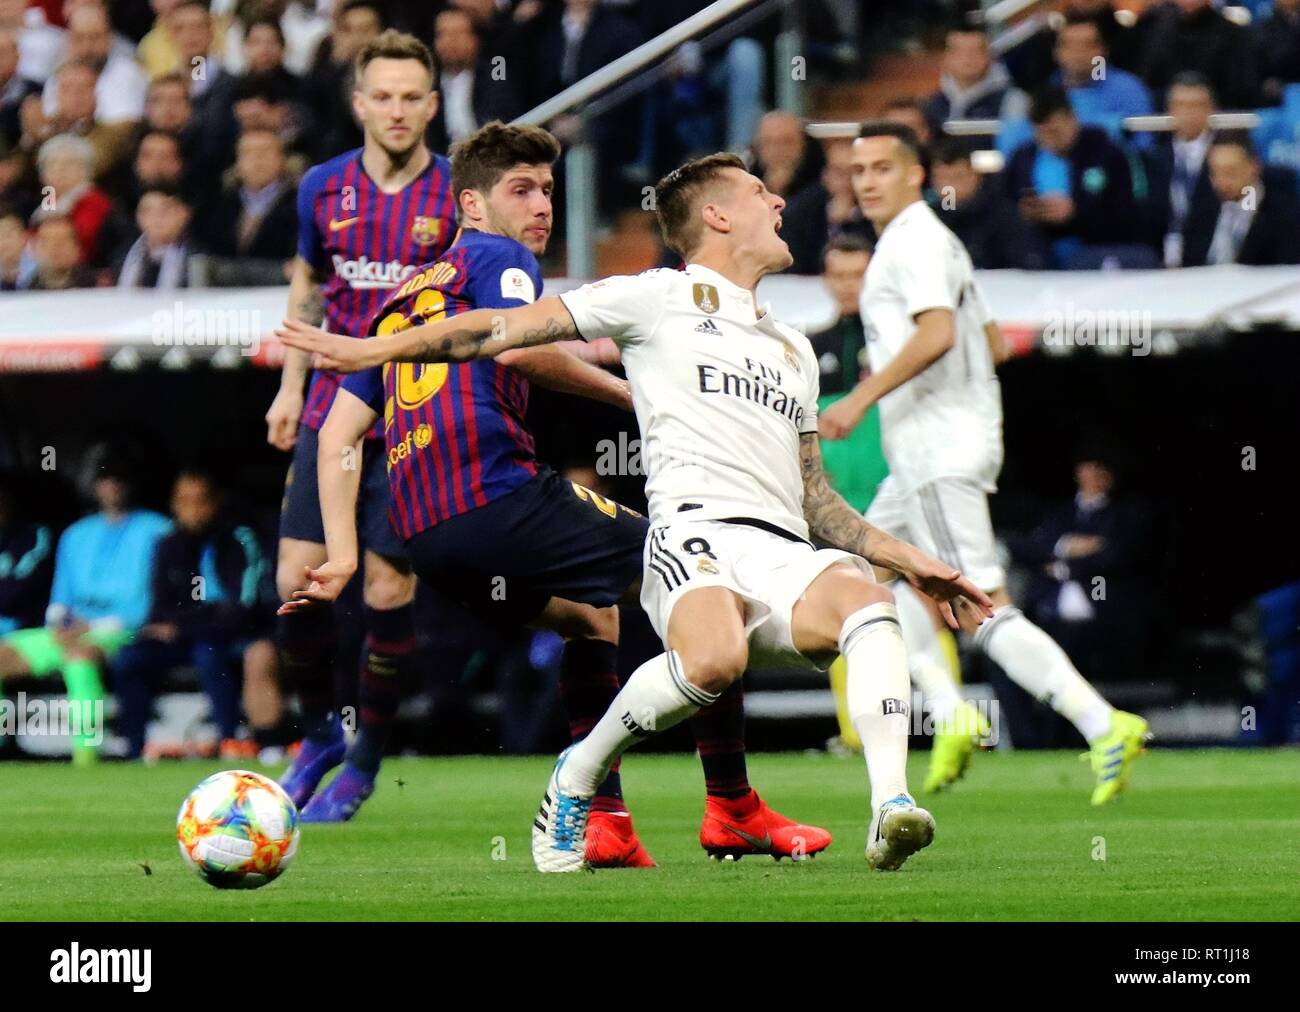 Madrid. 27th Feb, 2019. Real Madrid's Toni Kroos (2nd R) competes with Barcelona's Sergi Roberto (2nd L) during the Spanish King's Cup semifinal second leg soccer match between Real Madrid and Barcelona in Madrid, Spain on Feb. 27, 2019. Real Madrid lost 0-3. Credit: Edward F. Peters/Xinhua/Alamy Live News Stock Photo